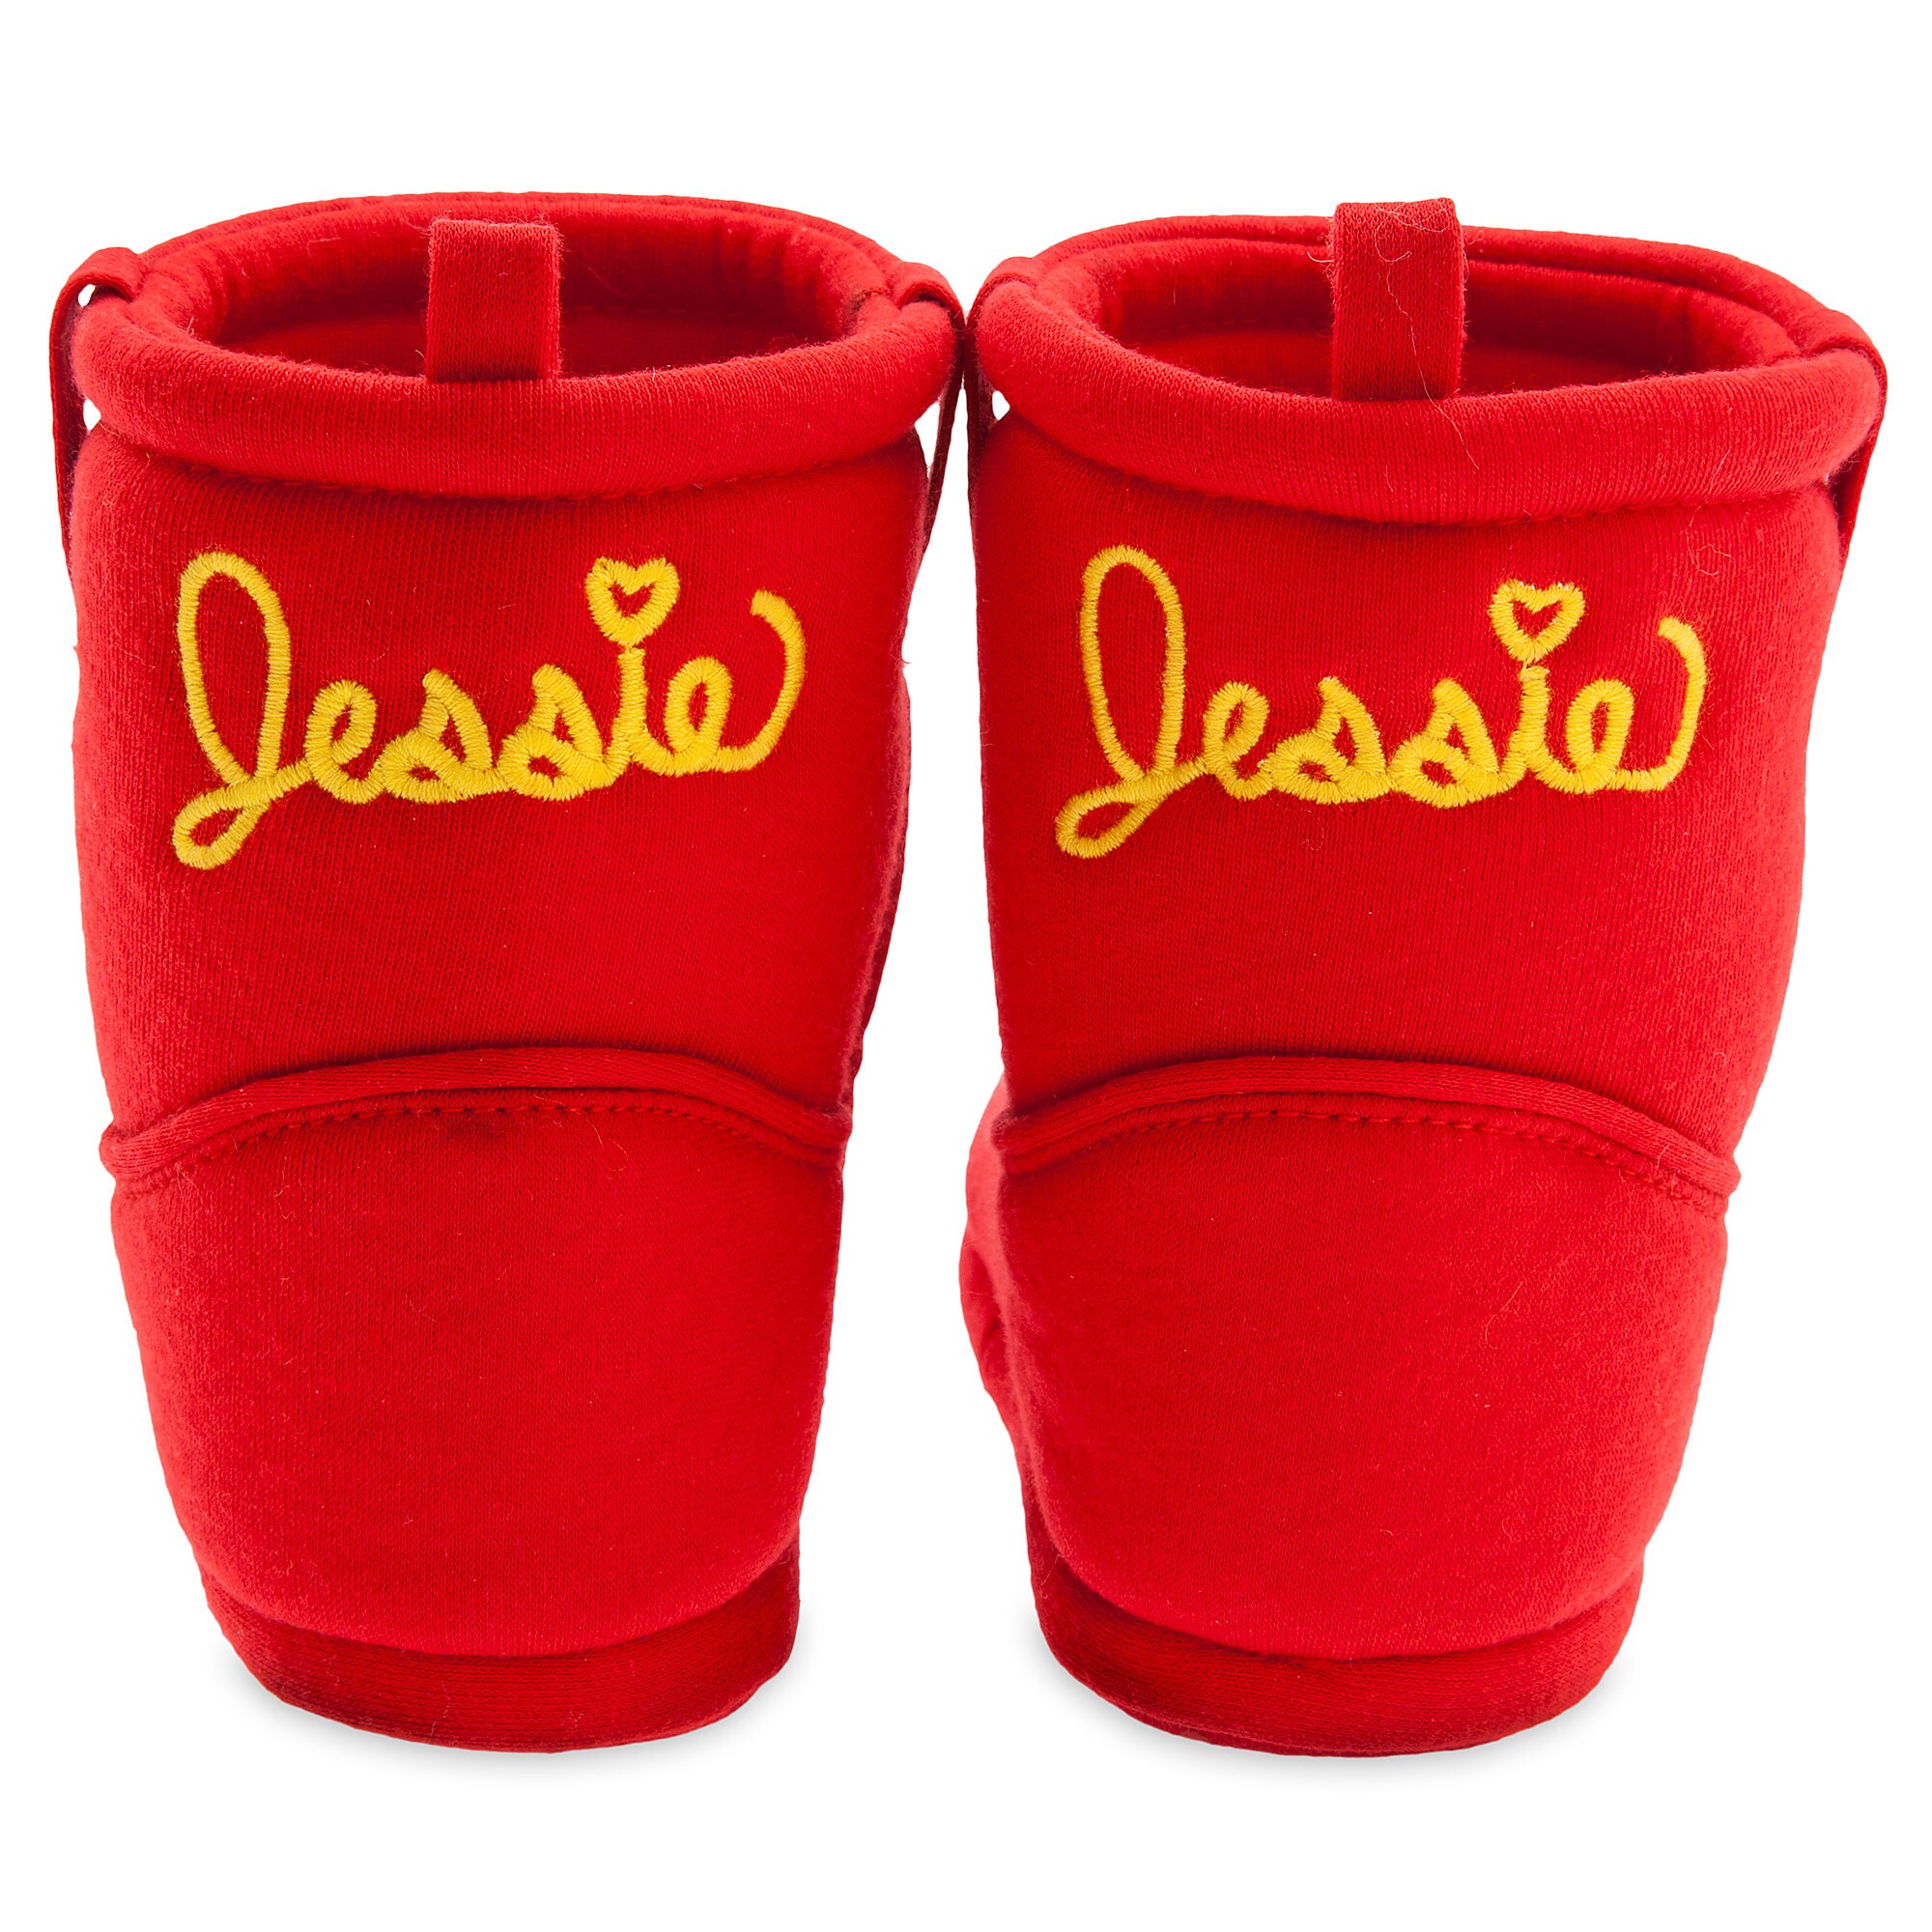 Jessie Costume Boots for Baby